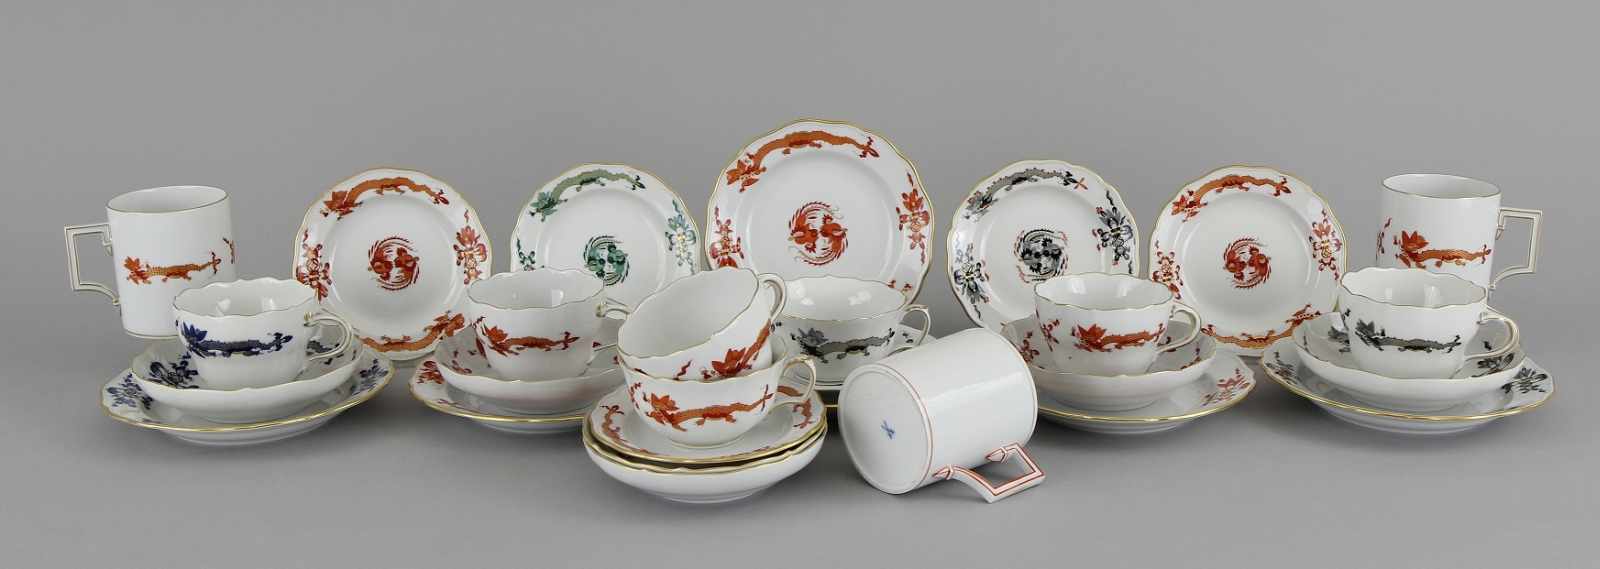 Bundle of 23 Meissen Items "Dragon Pattern"Seven cups with saucers and plates, two chocolate